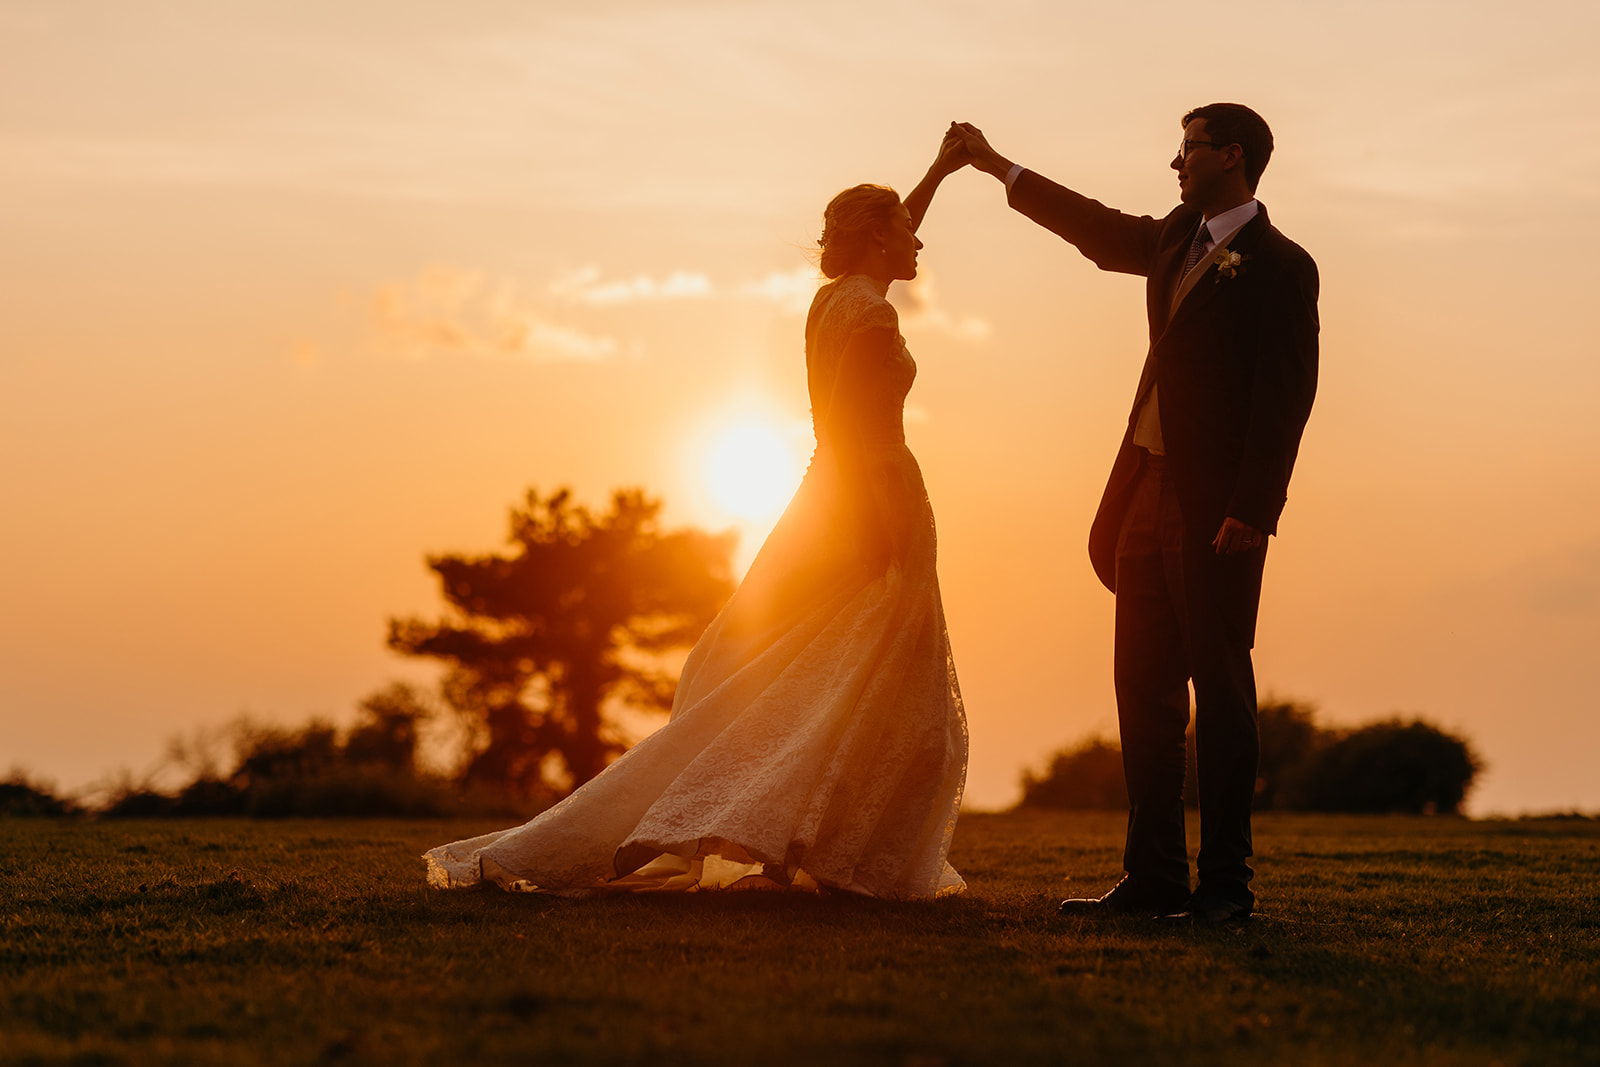 sunset photograph of groom twirling bride